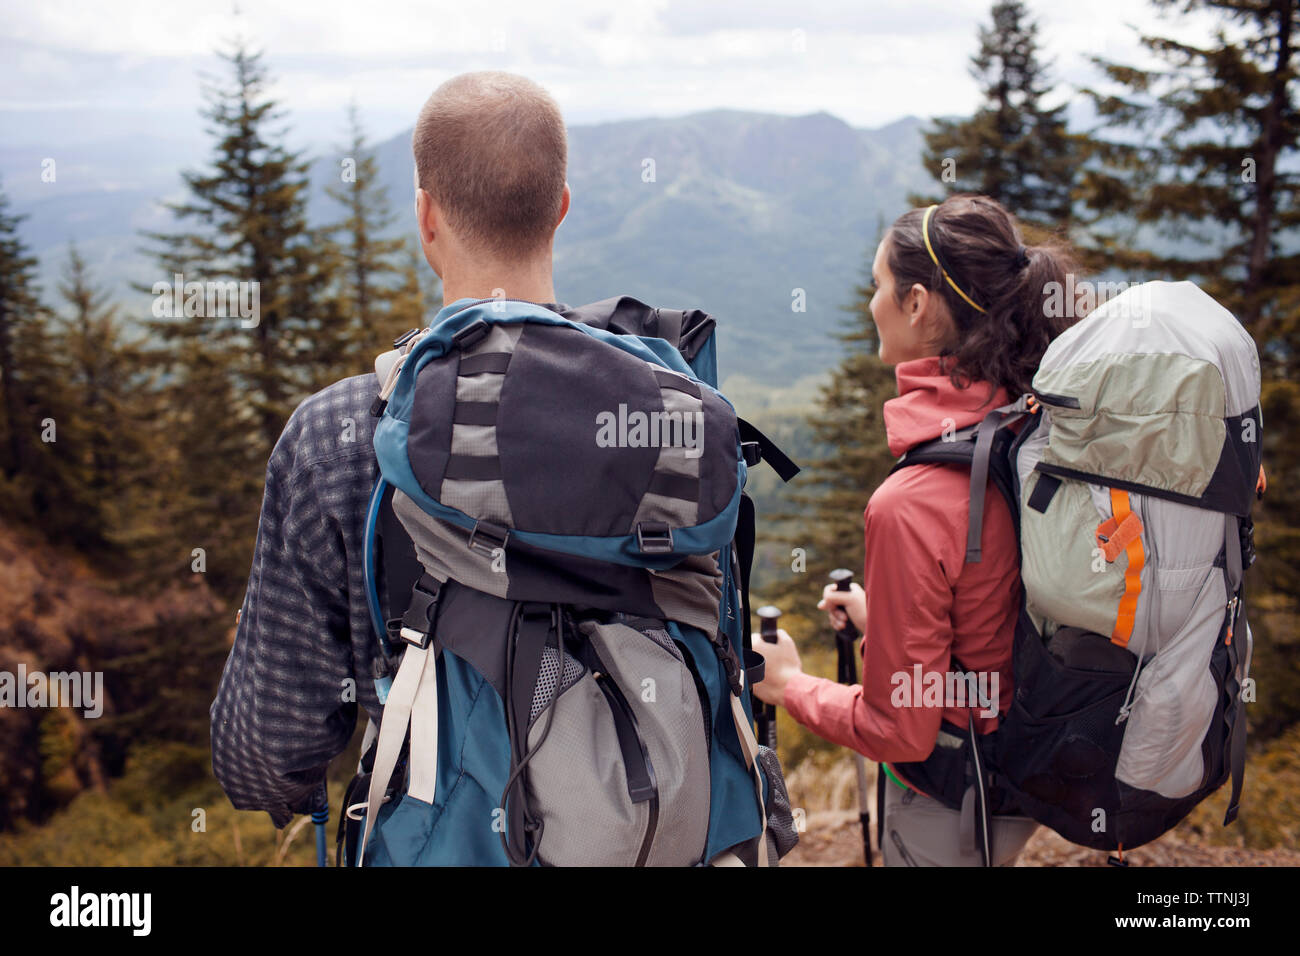 Hikers carrying backpacks while looking at mountains Stock Photo